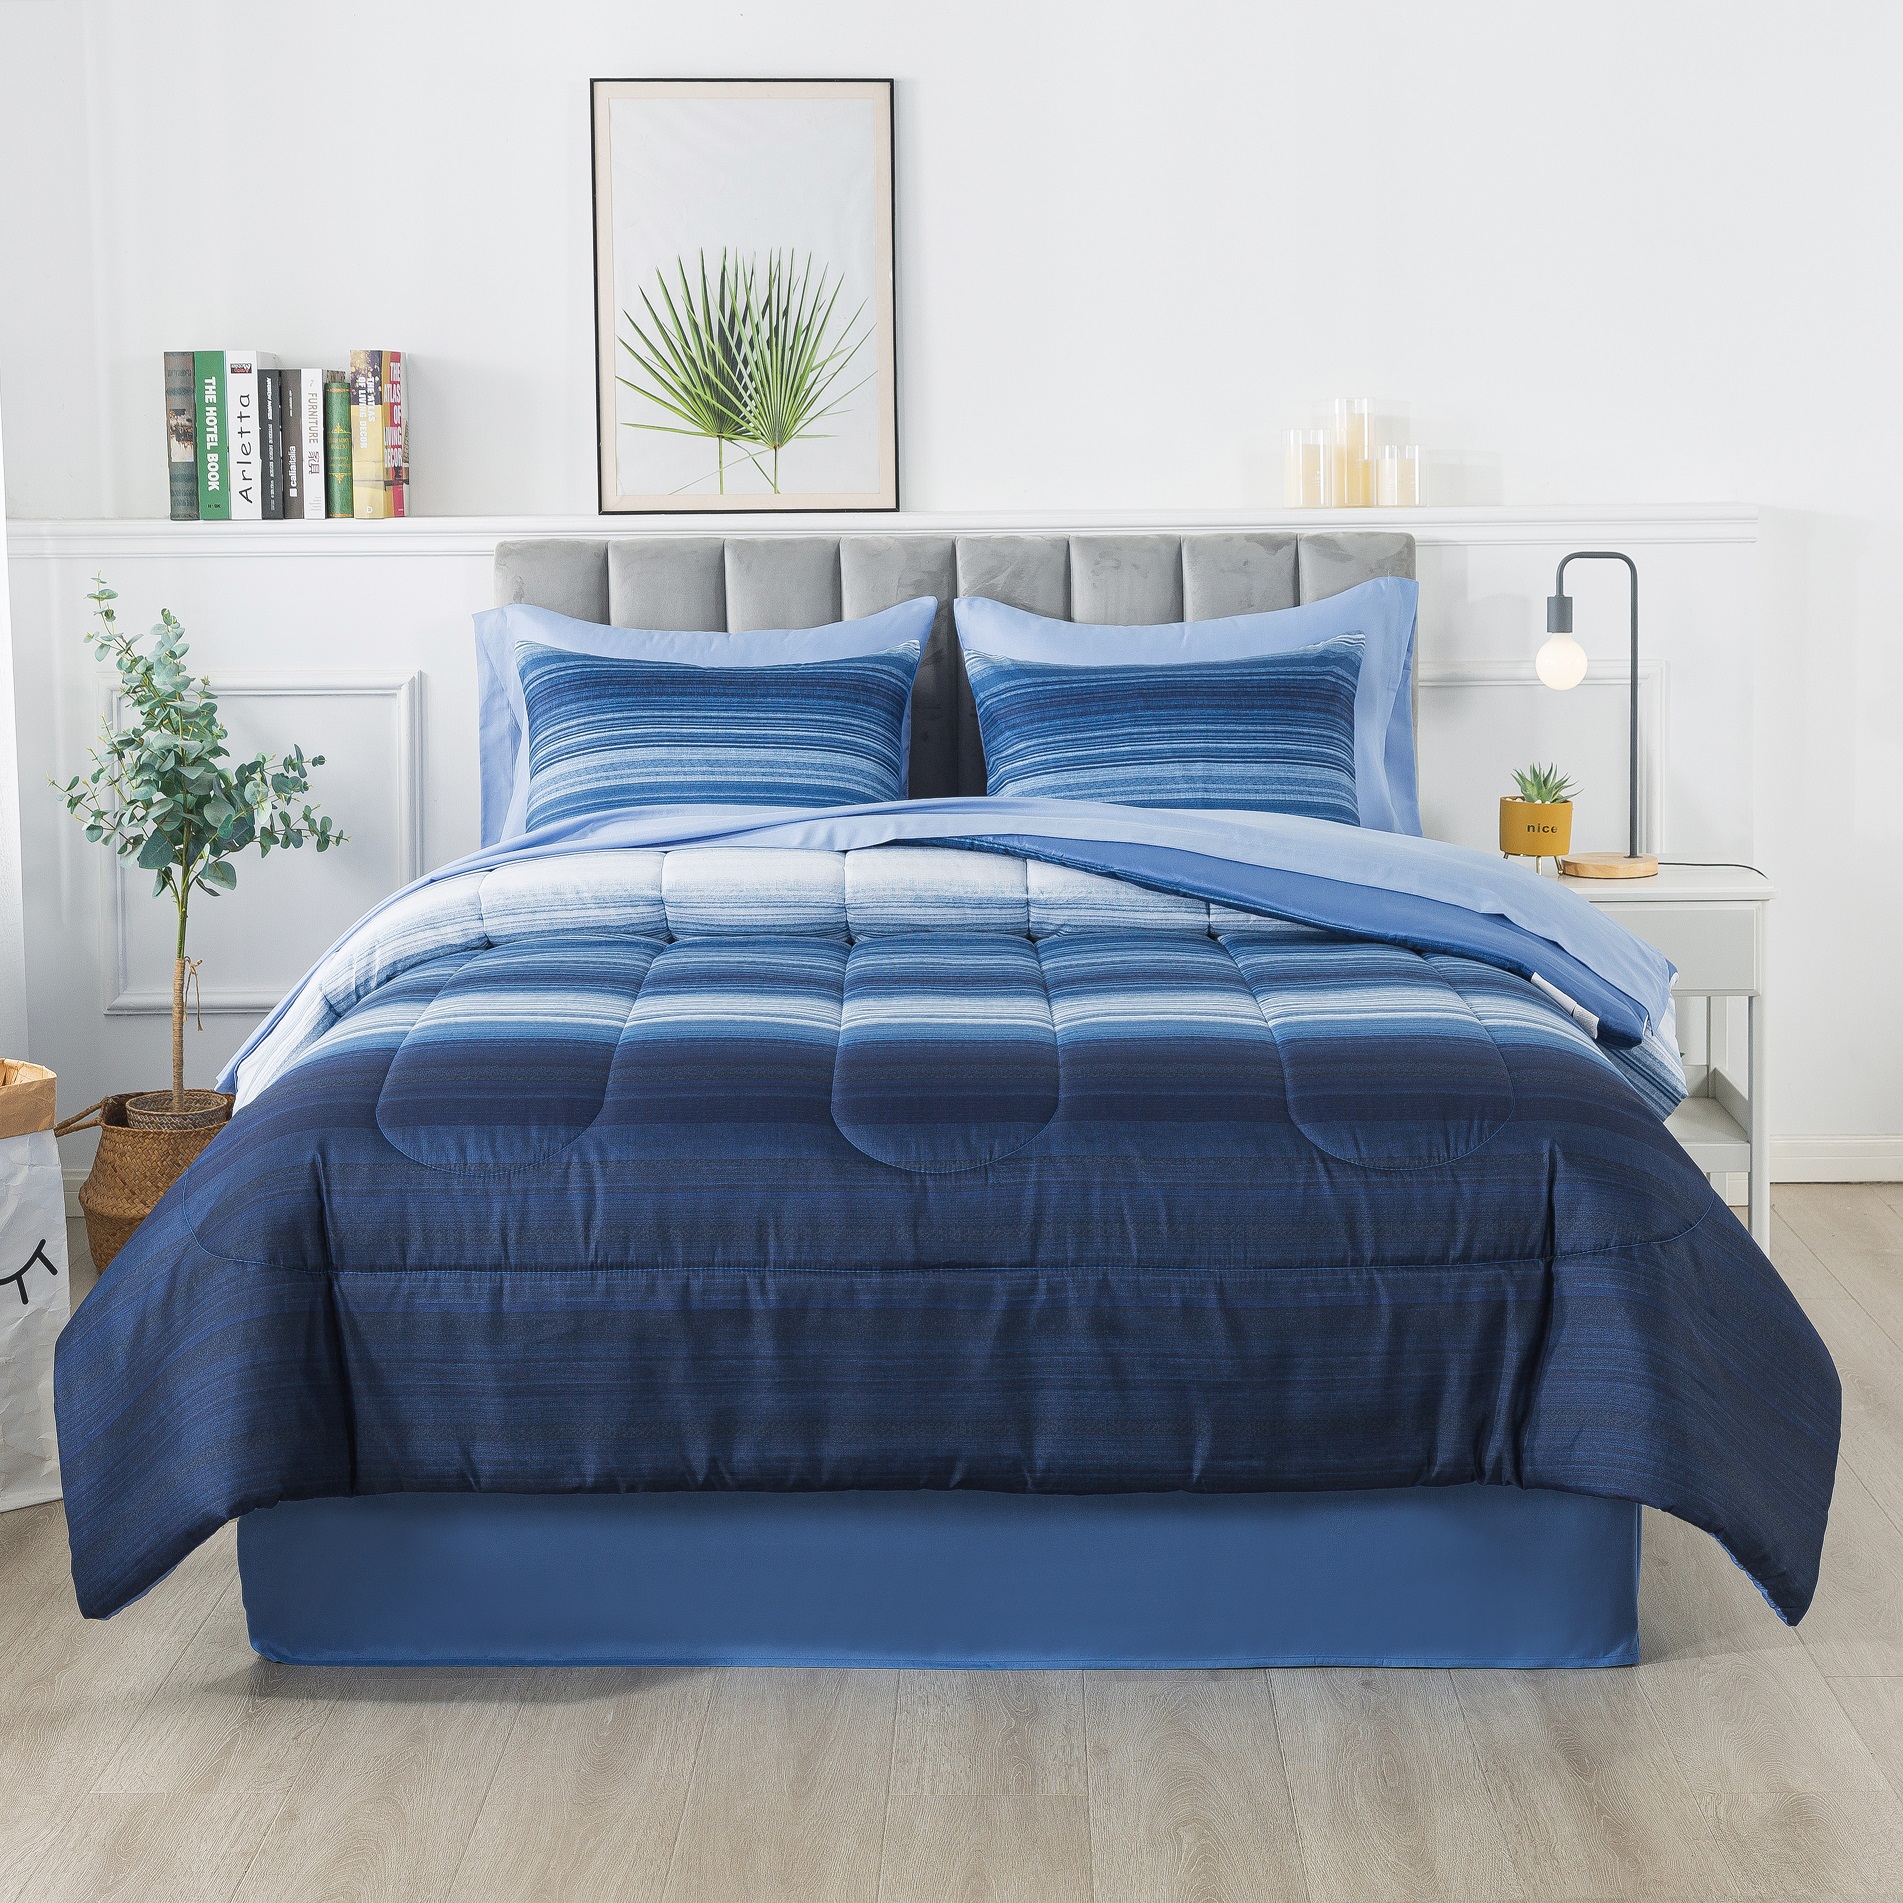 Mainstays Blue Stripe 6 Piece Bed in a Bag Comforter Set With Sheets, Twin/Twin XL - image 1 of 8